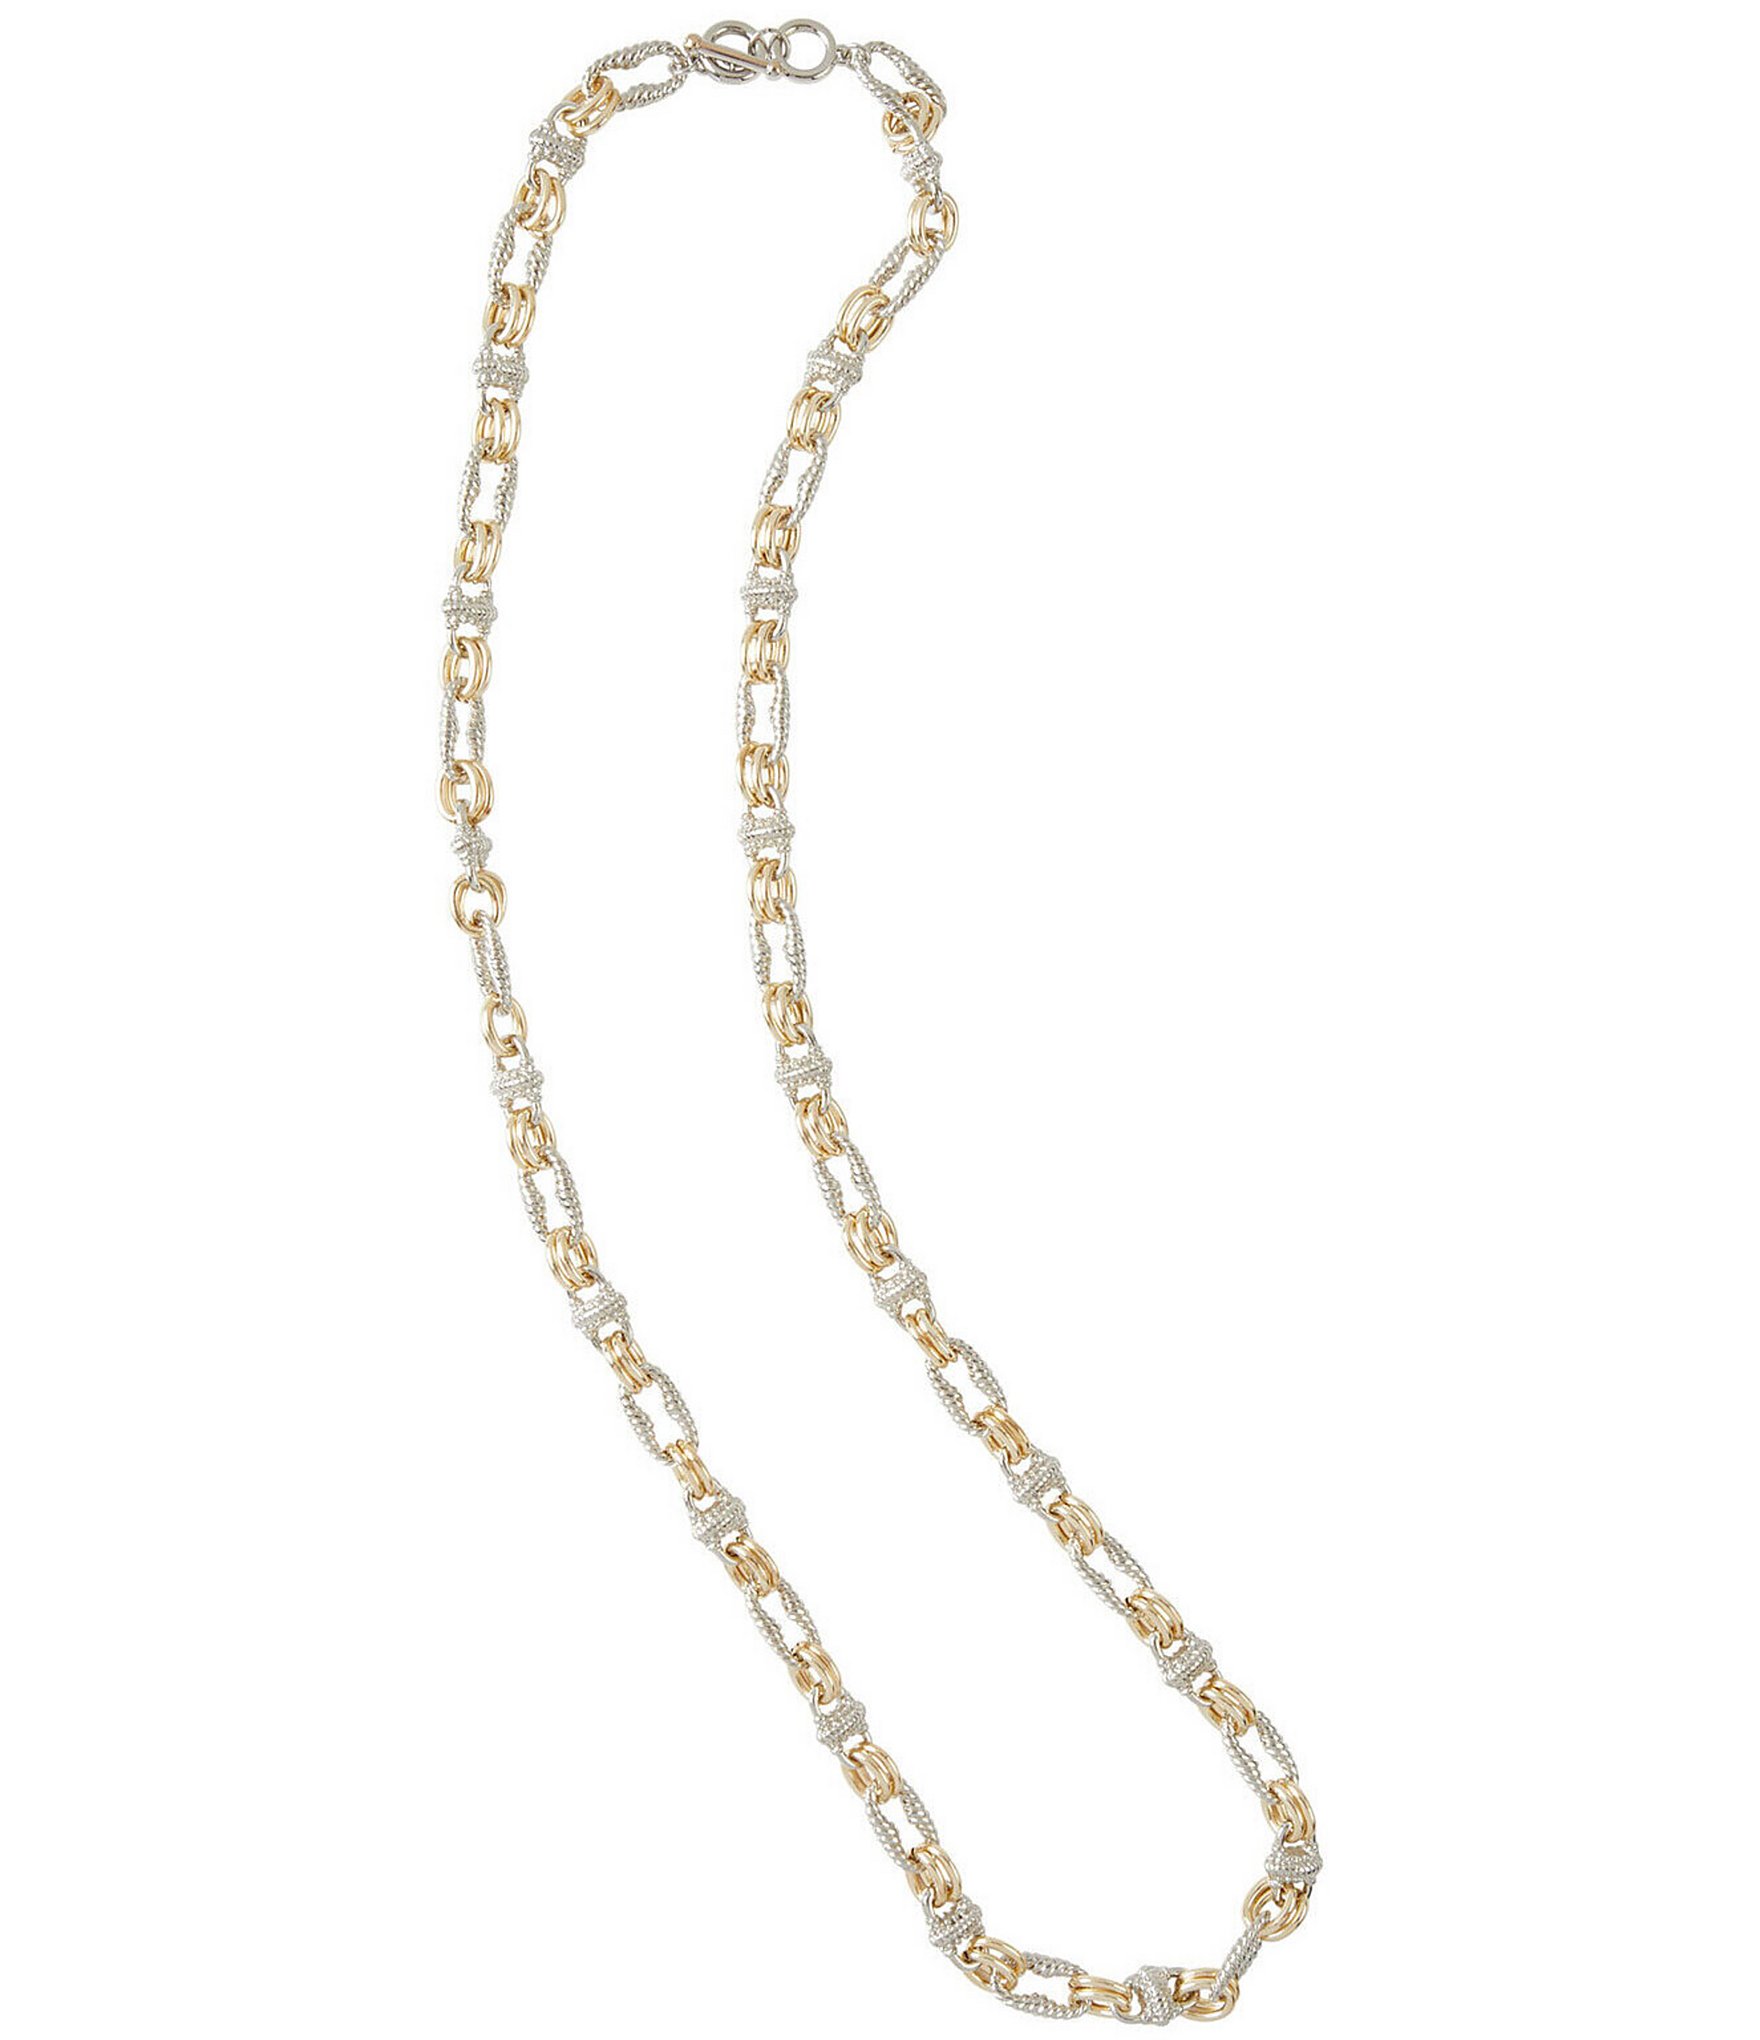 Bicolore Chunky Large Decorative Chain (2 Lengths), 50cm